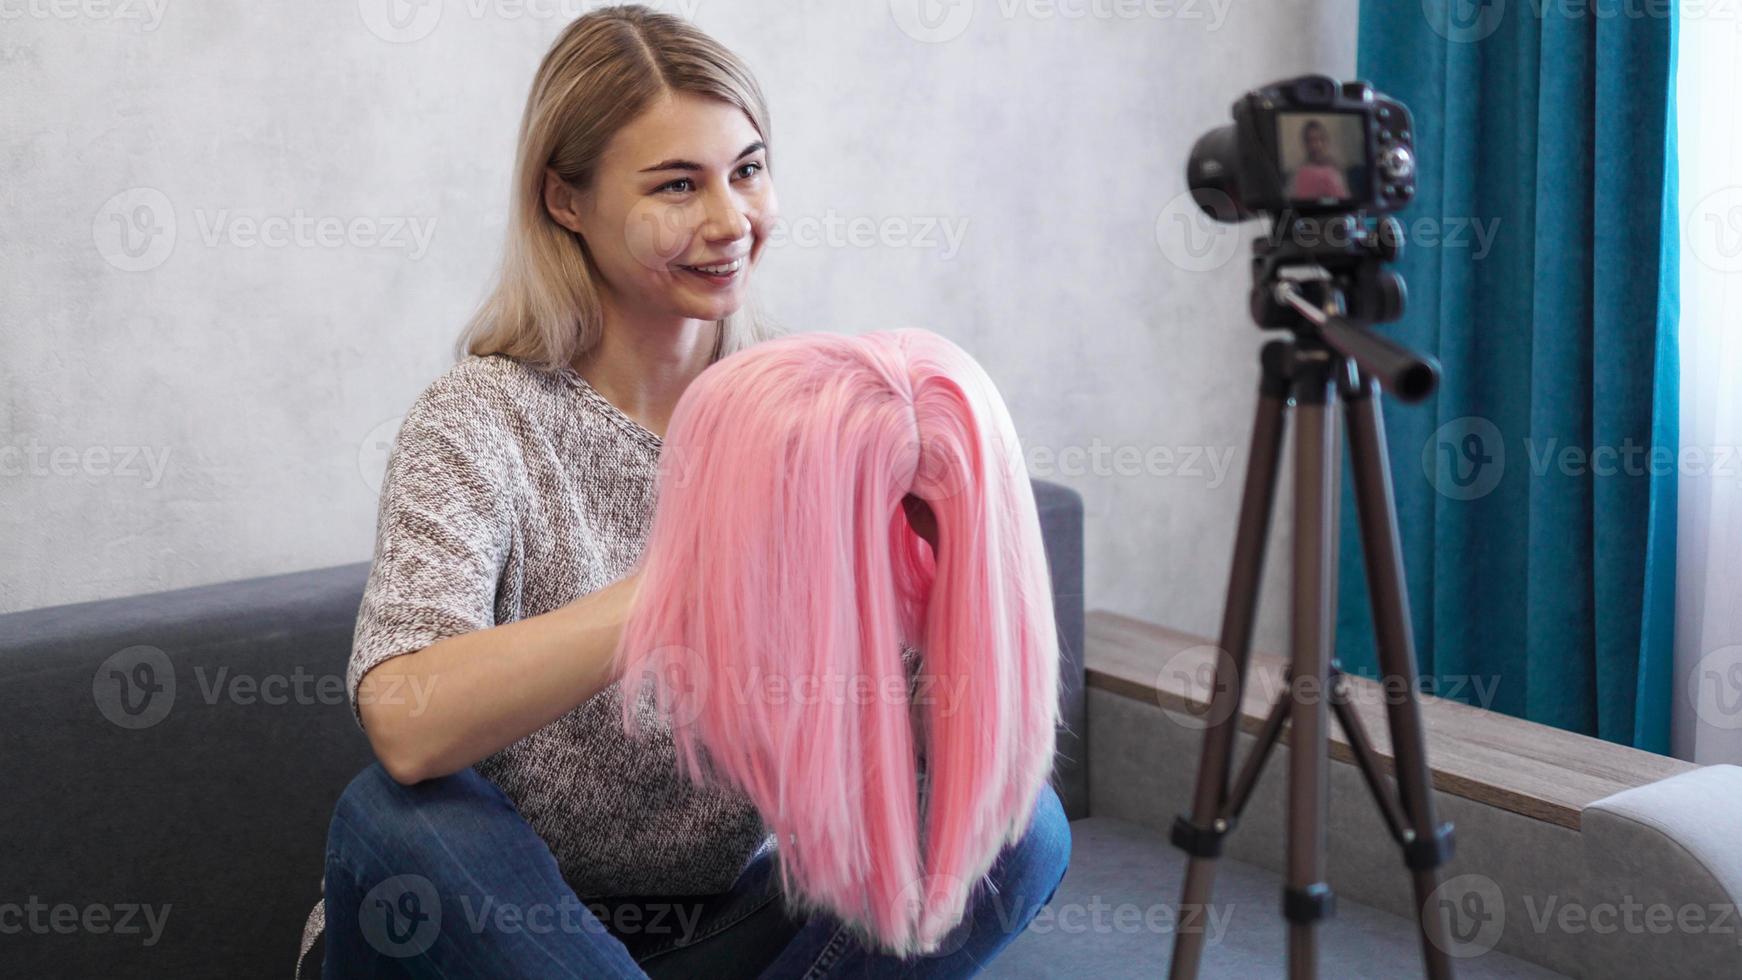 Woman blogger records video. She shows pink wig photo